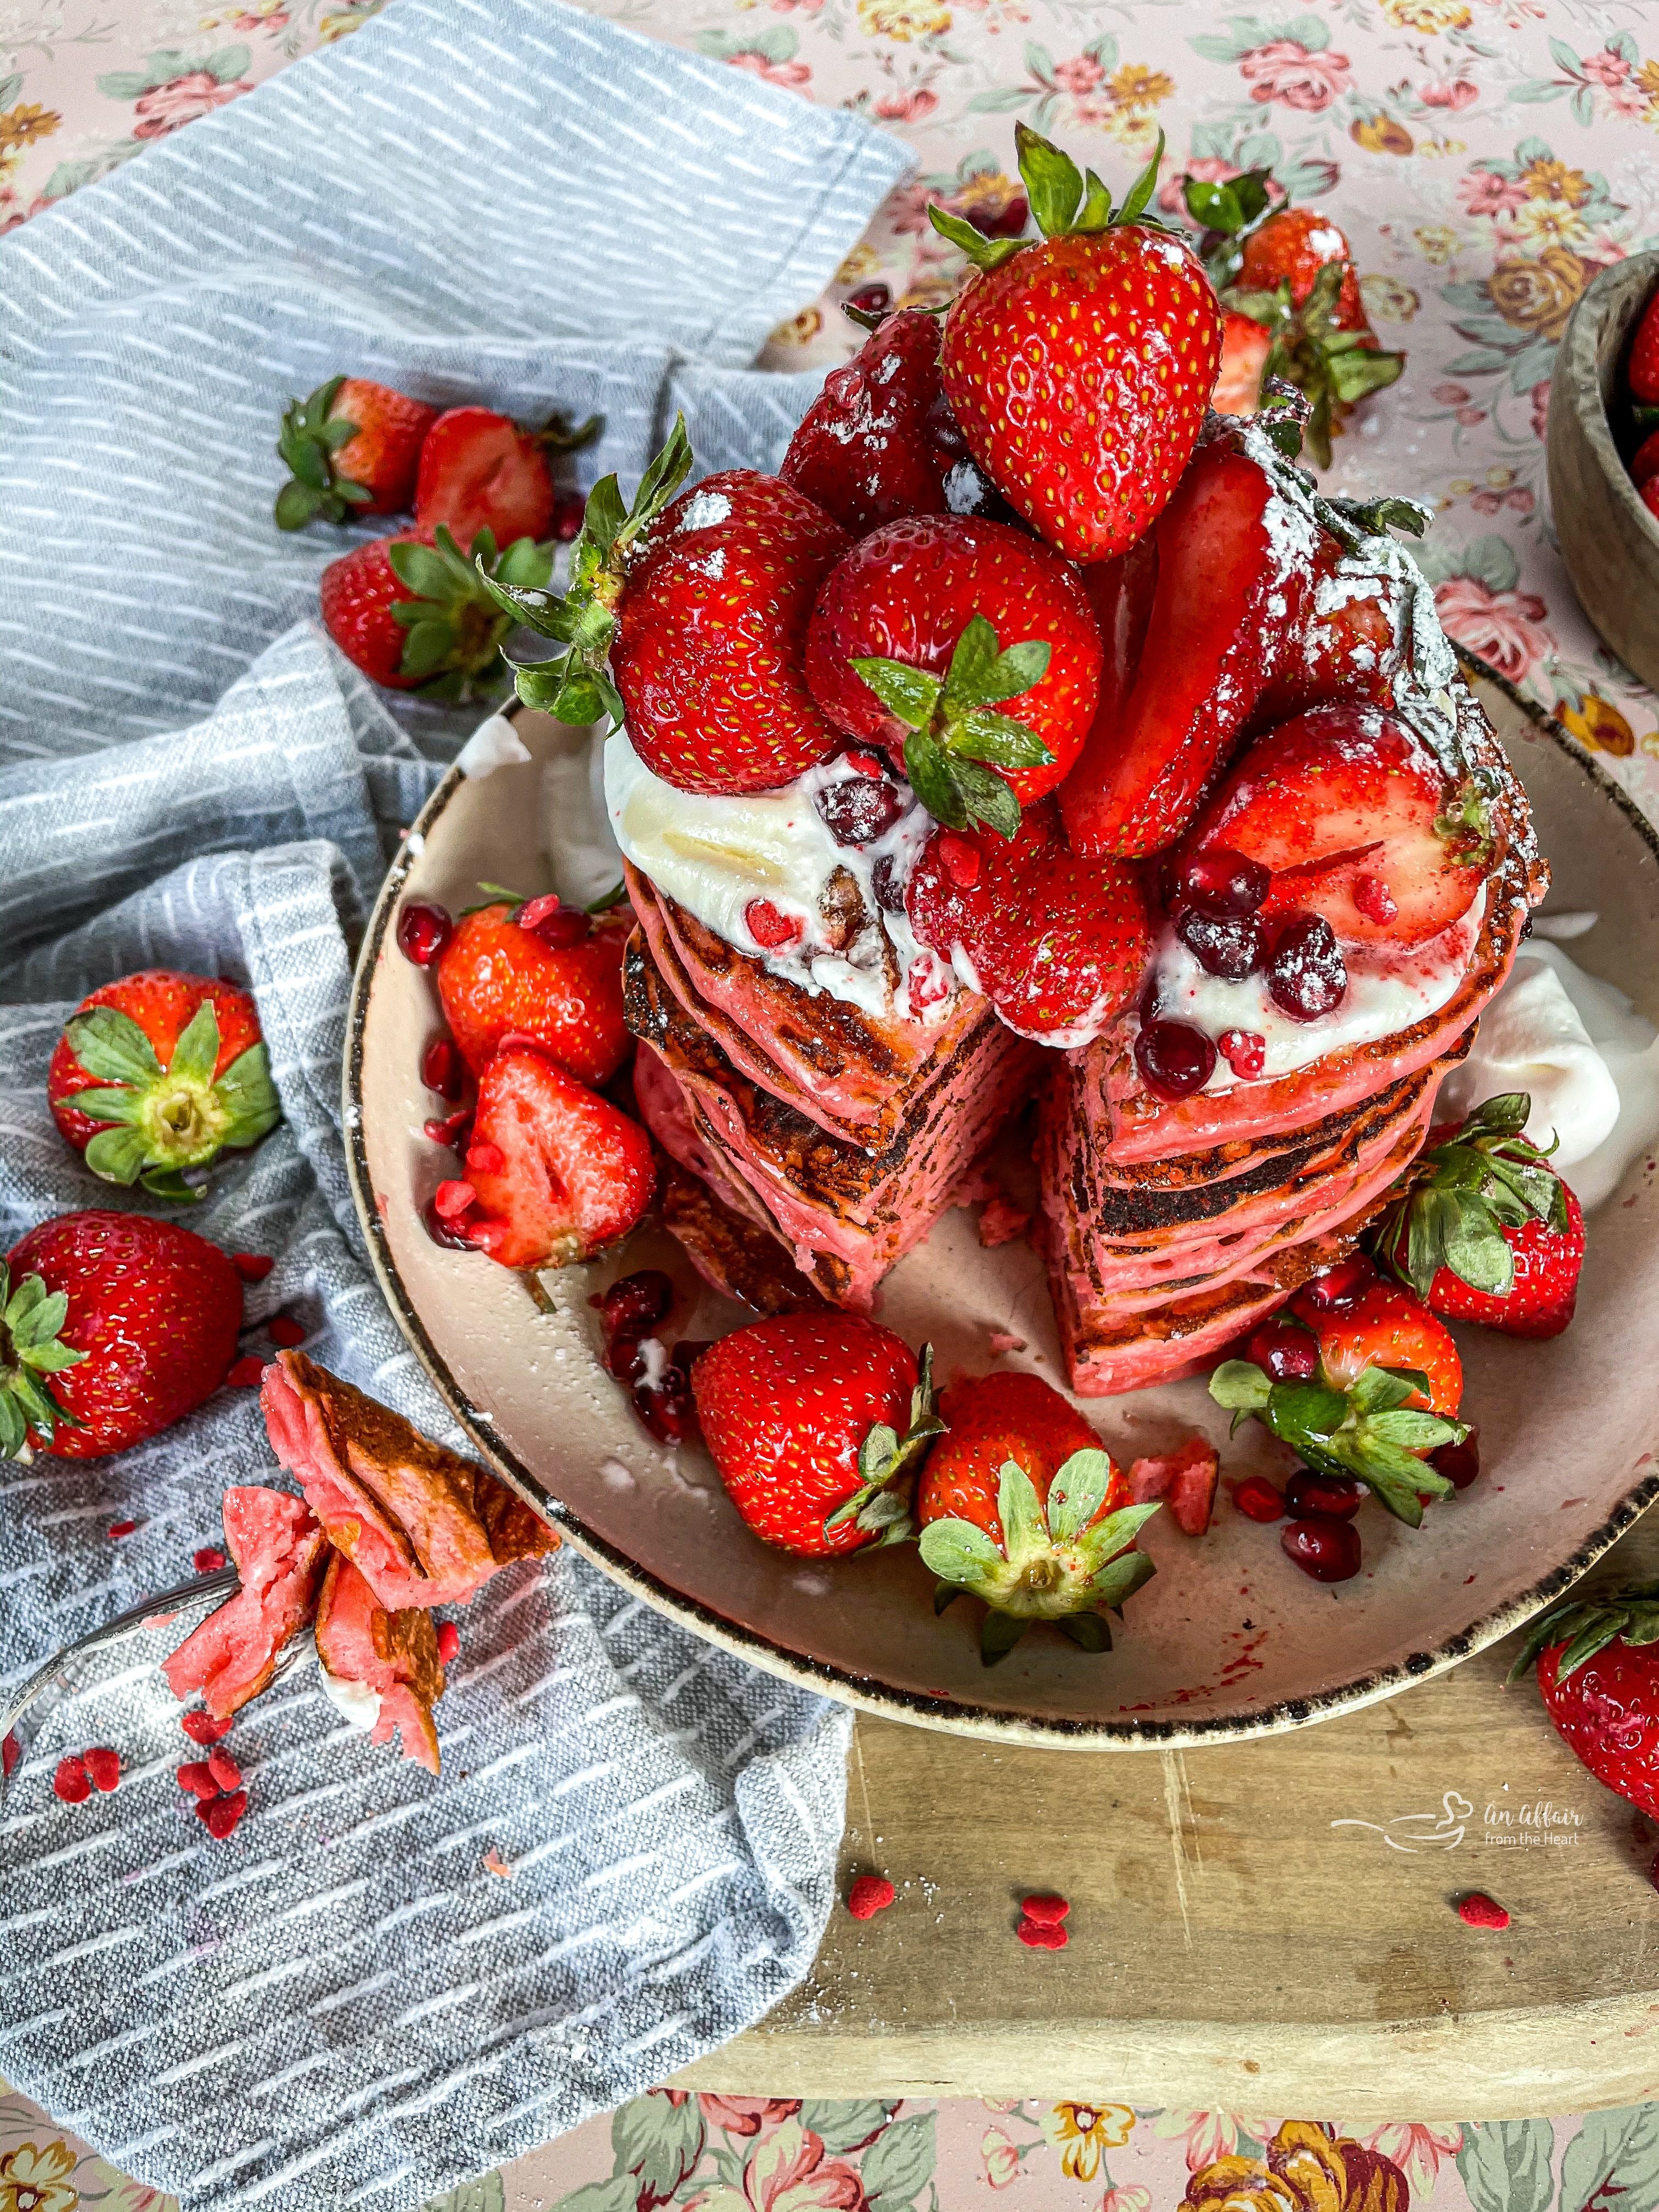 The Best Strawberry Pancakes - Pretty Pink Pancakes made with Jell-O